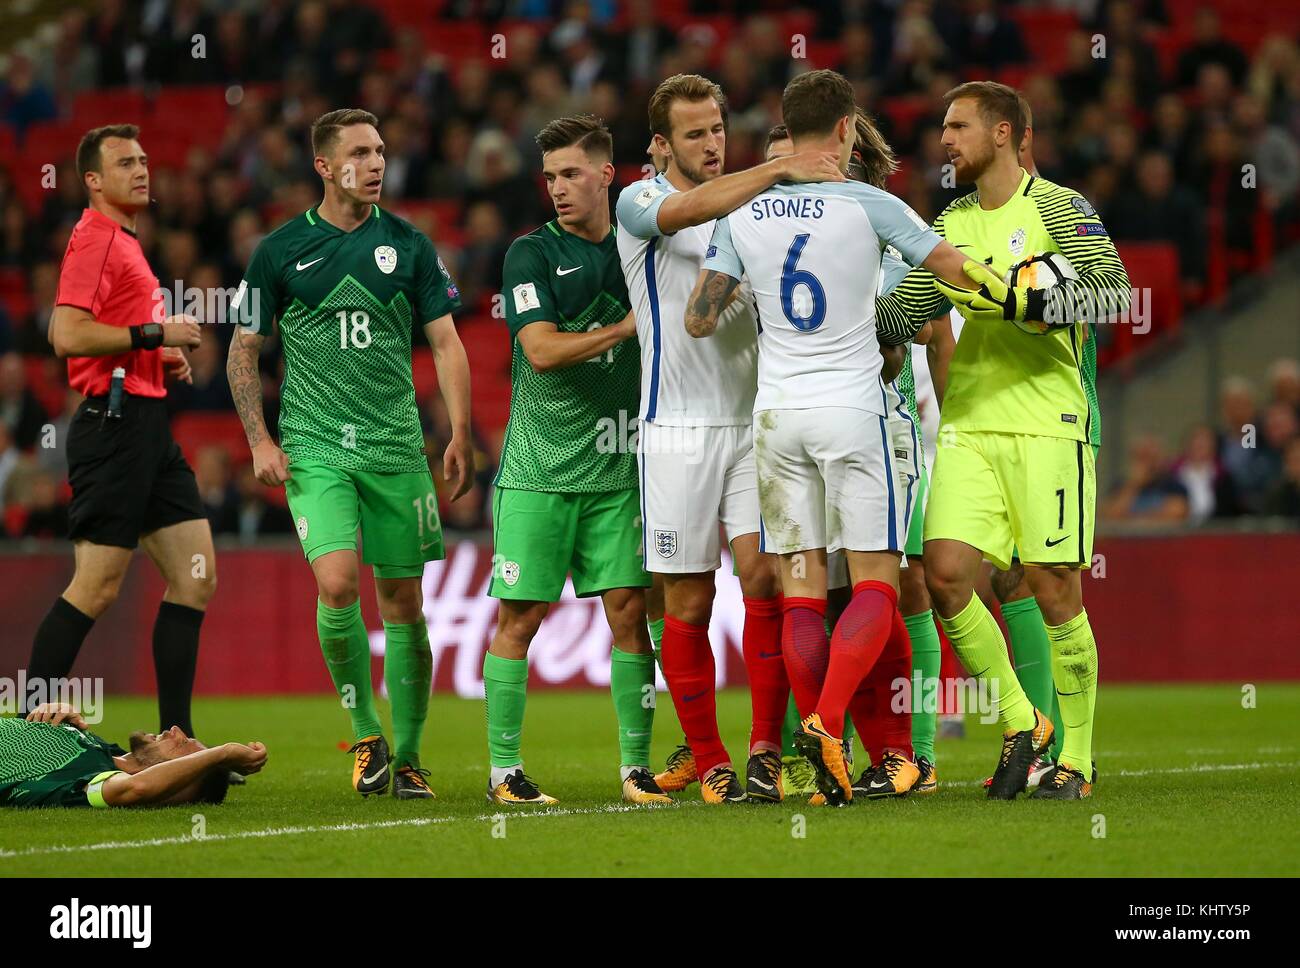 Harry Kane of England pulls John Stones away from an altercation with Rene Krhin of Slovenia  during the FIFA World Cup Qualifier match between England and Slovenia at Wembley Stadium in London. 05 Oct 2017 *** EDITORIAL USE ONLY *** No merchandising. For Football images FA and Premier League restrictions apply inc. no internet/mobile usage without FAPL license - for details contact Football Dataco Stock Photo